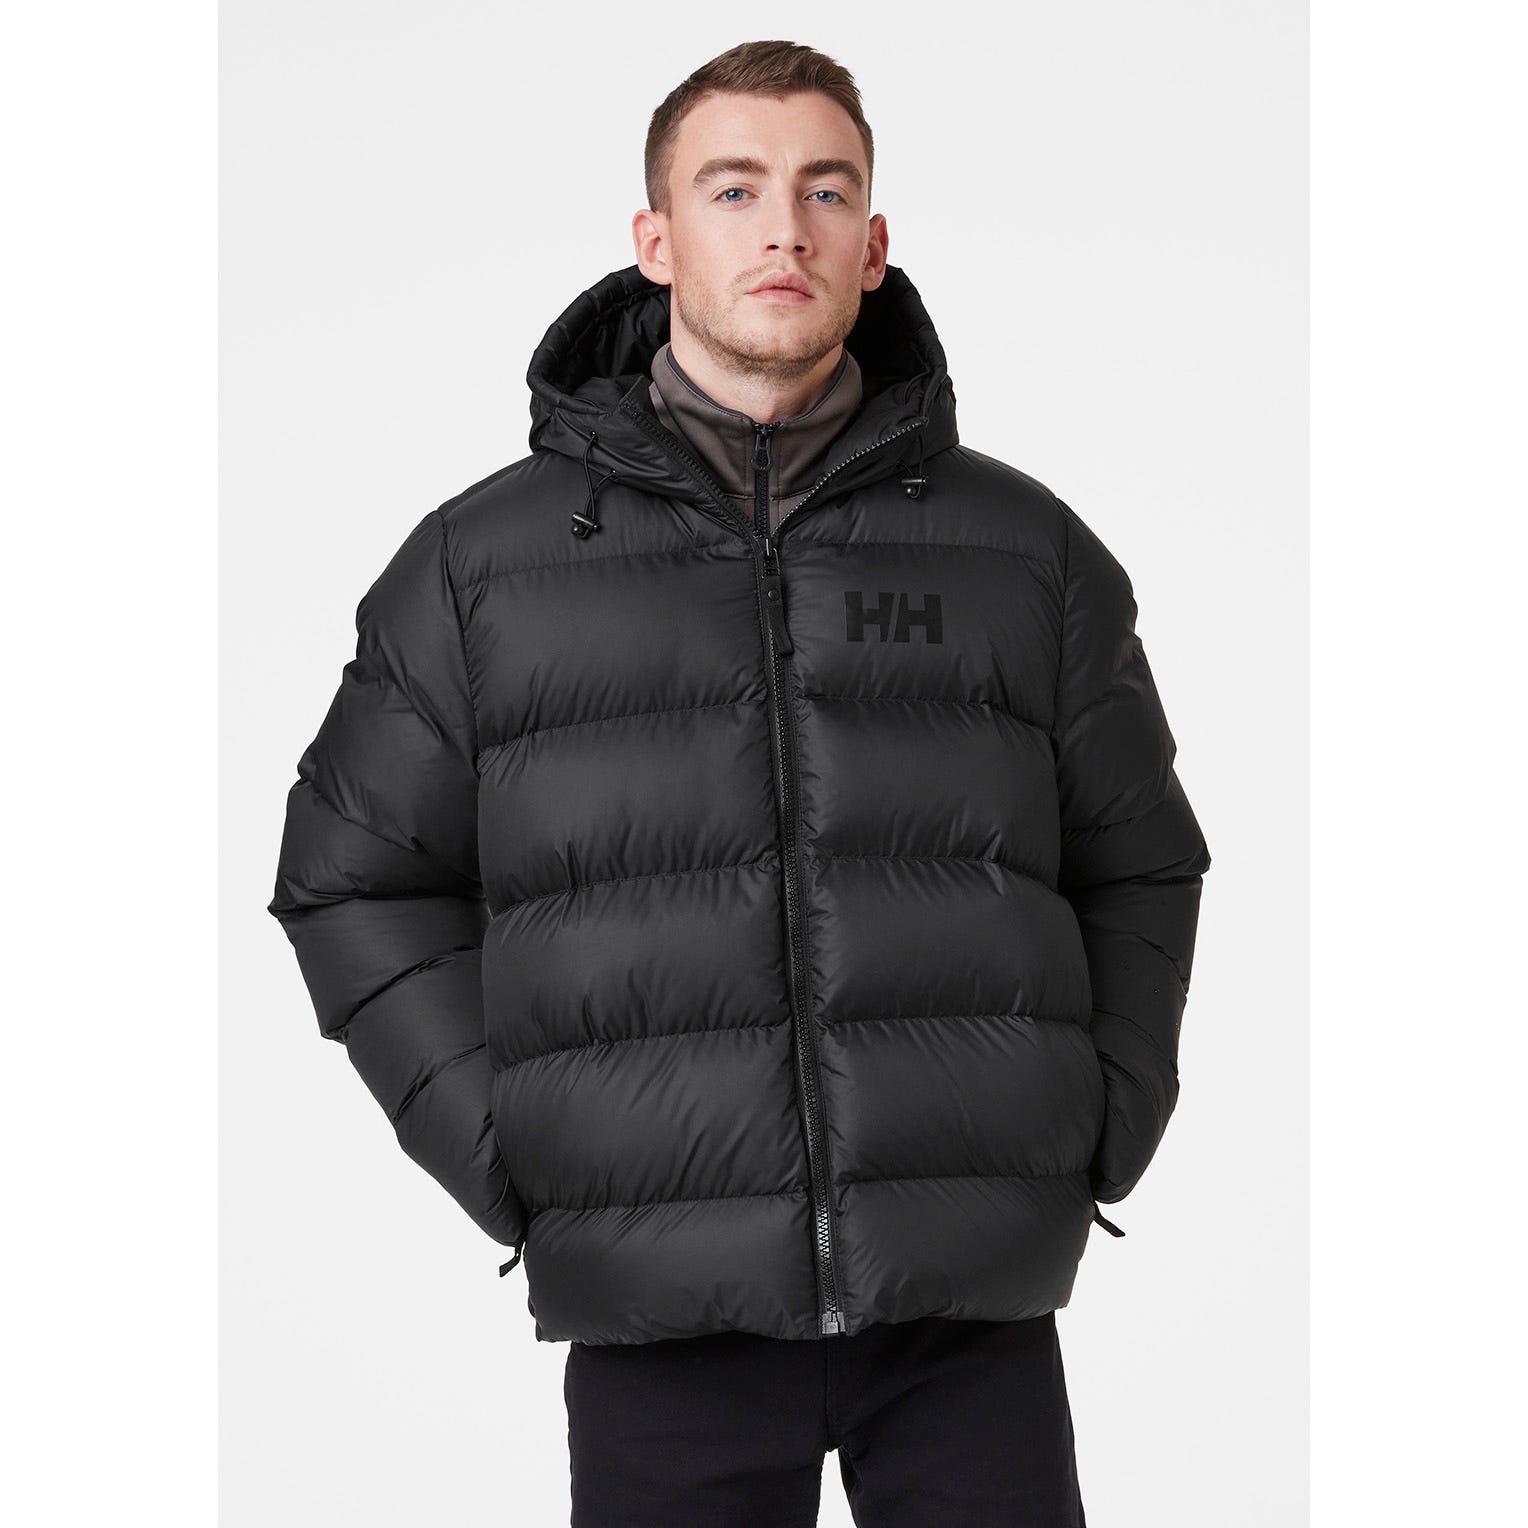 Helly Hansen Synthetic Active Puffy Jacket in Black for Men - Lyst